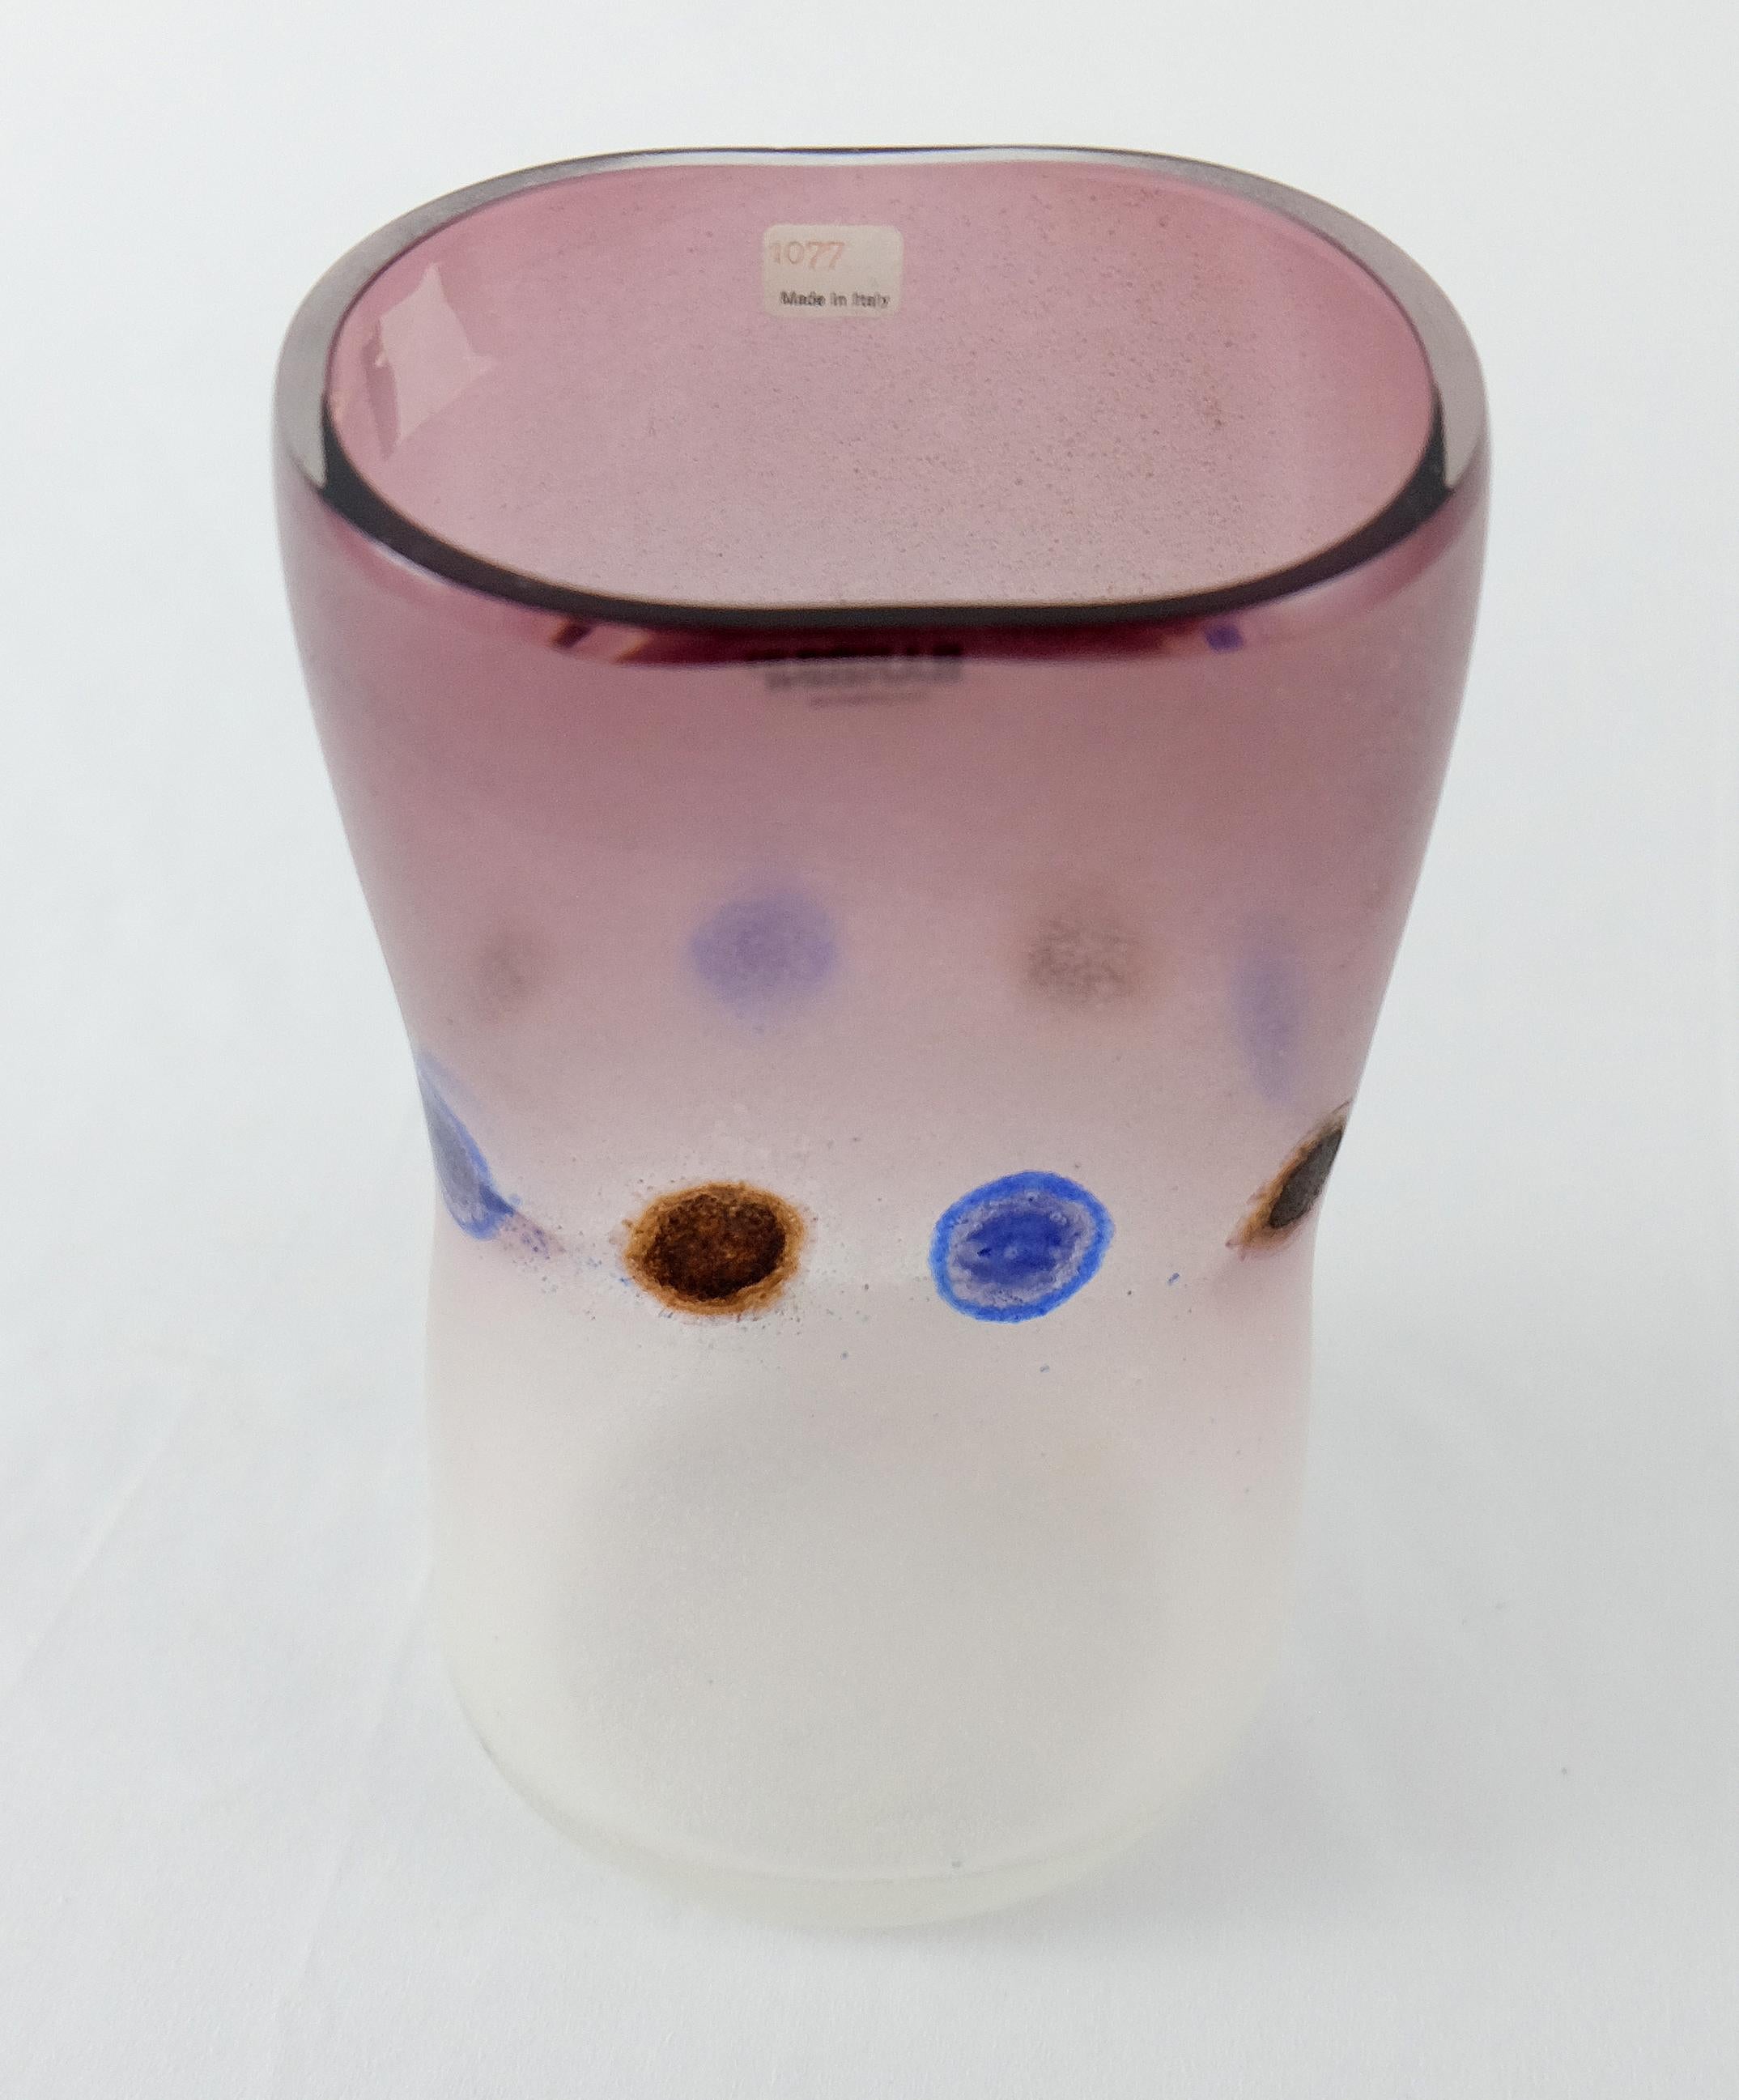 Barbini Murano Glass Vase with Dots

Offered for sale is a handblown Murano glass vase in purple to mauve by Barbini. The vase is decorated with surrounded with a band of infused glass dots. The vase retains the maker's label. Alfredo Barbini, a